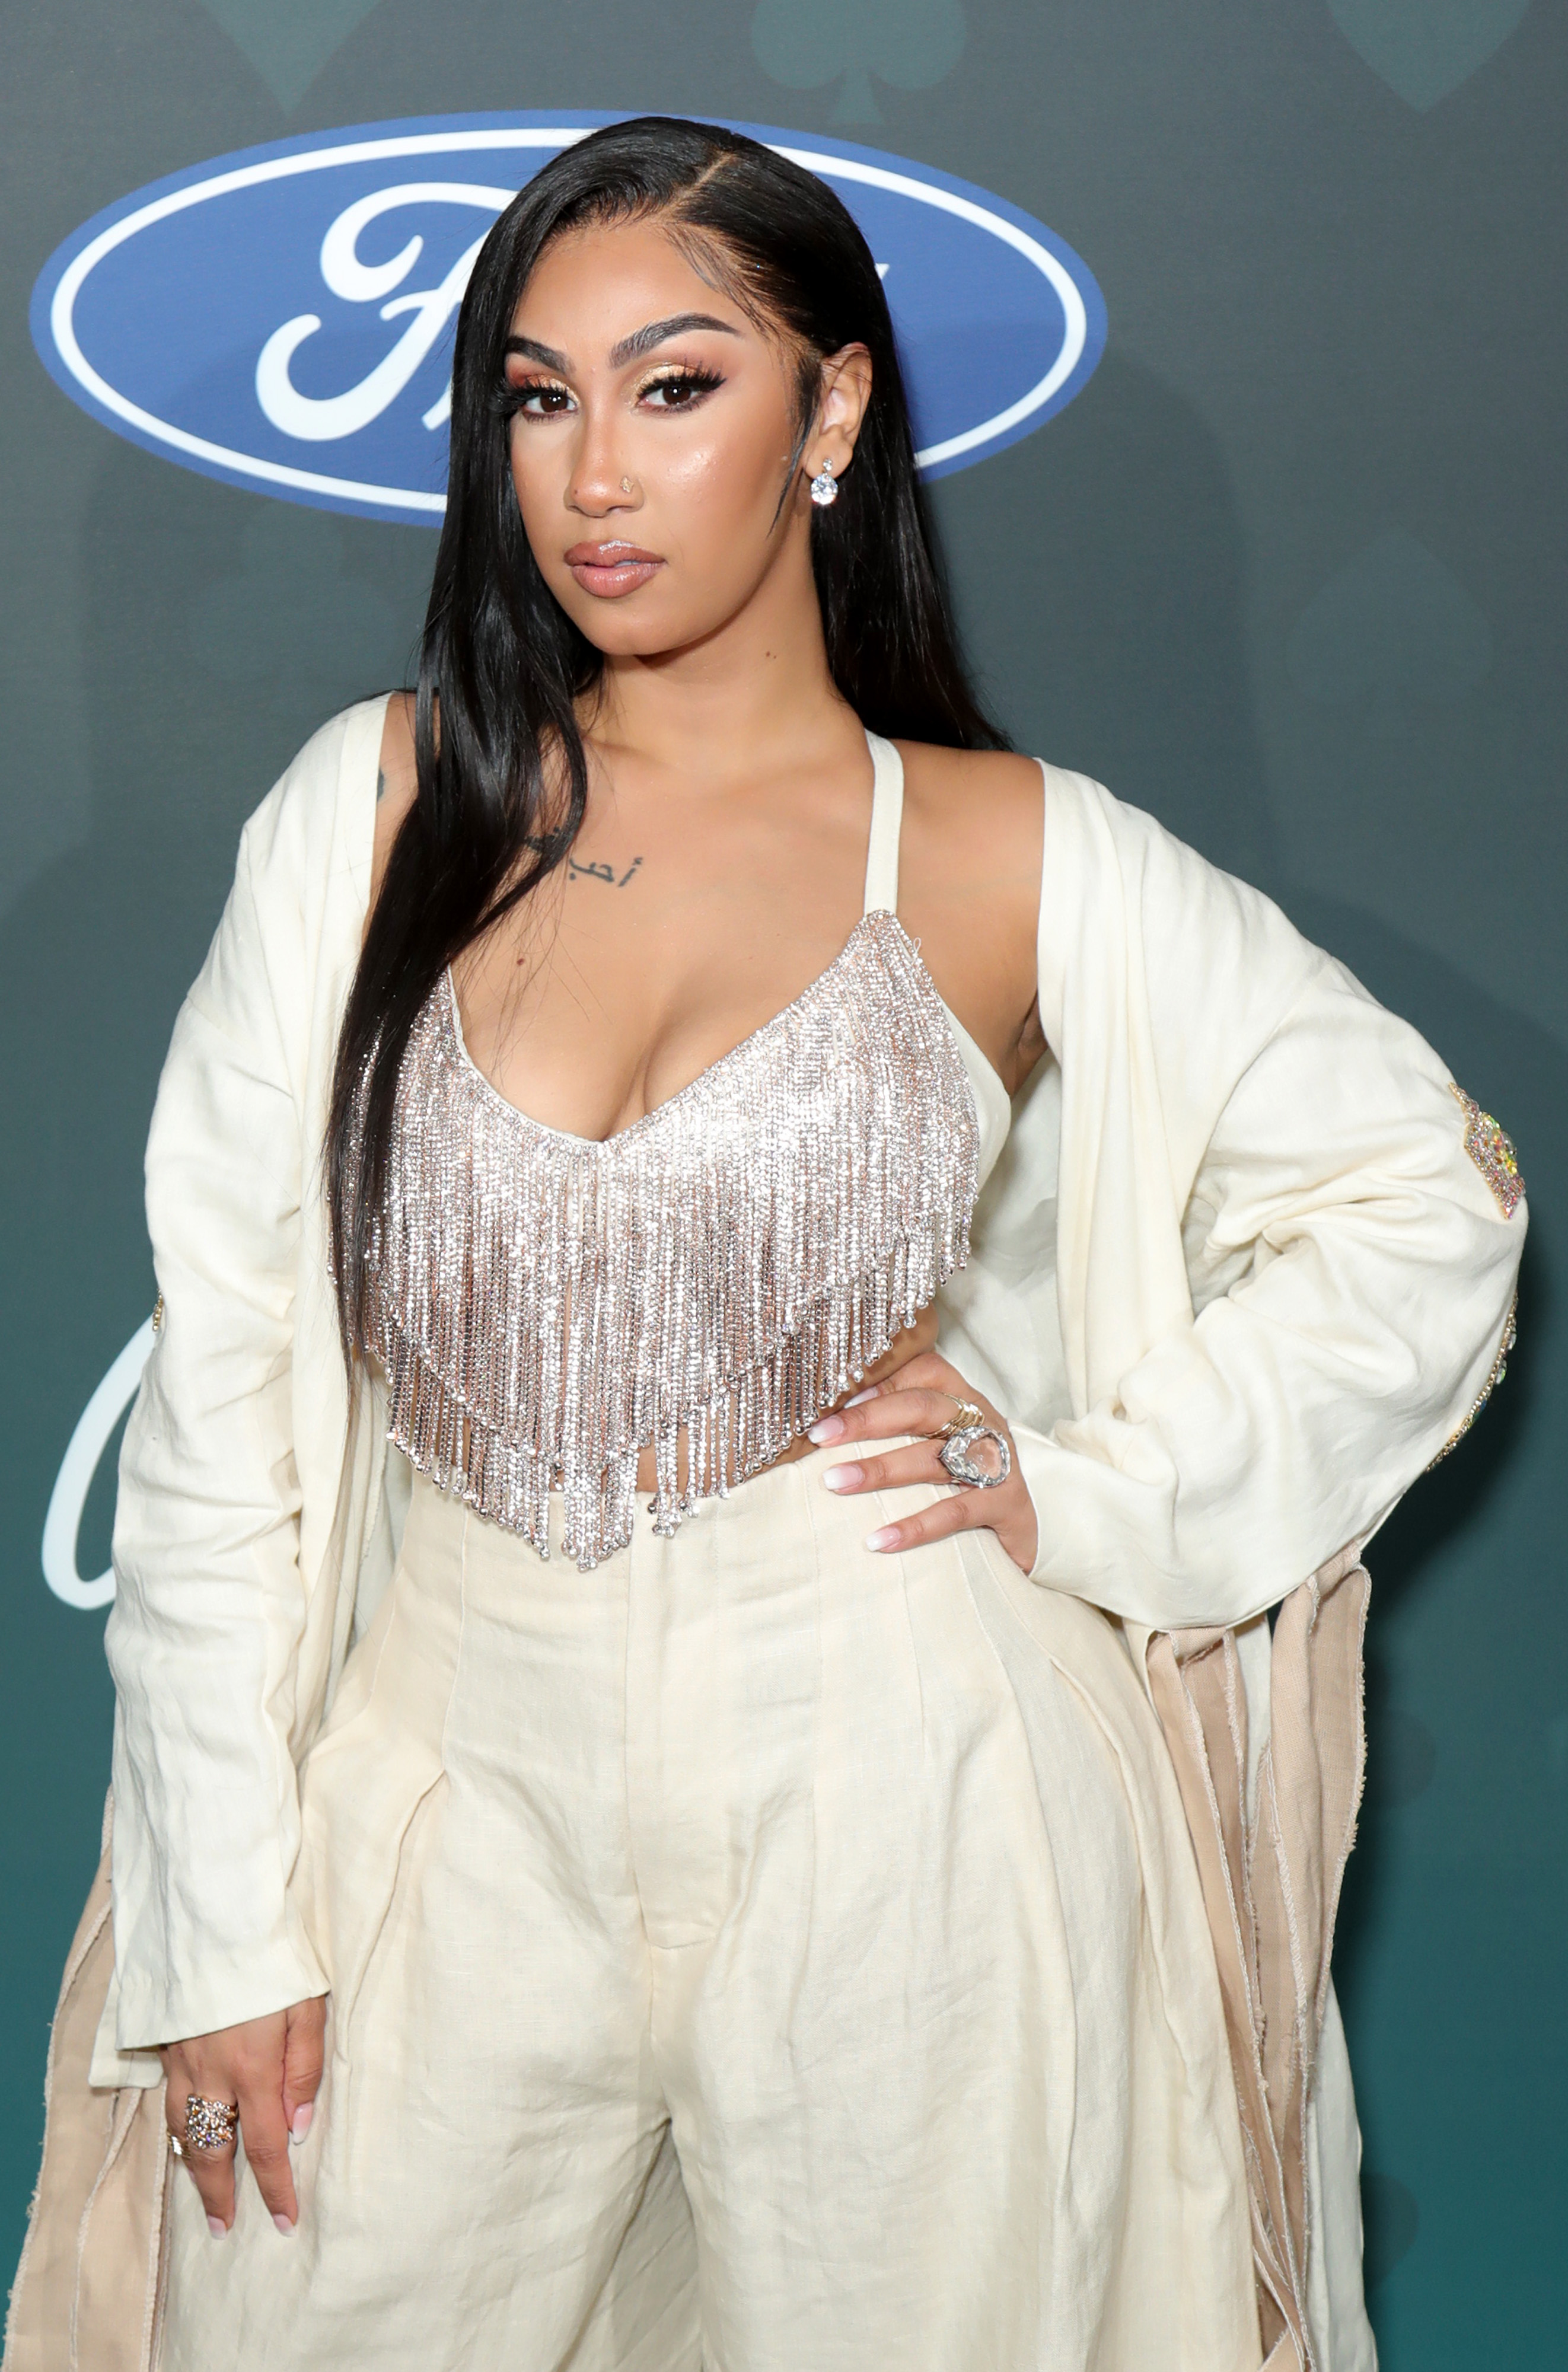 Queen Naija Defends Herself Once Again From Colorism Accusations